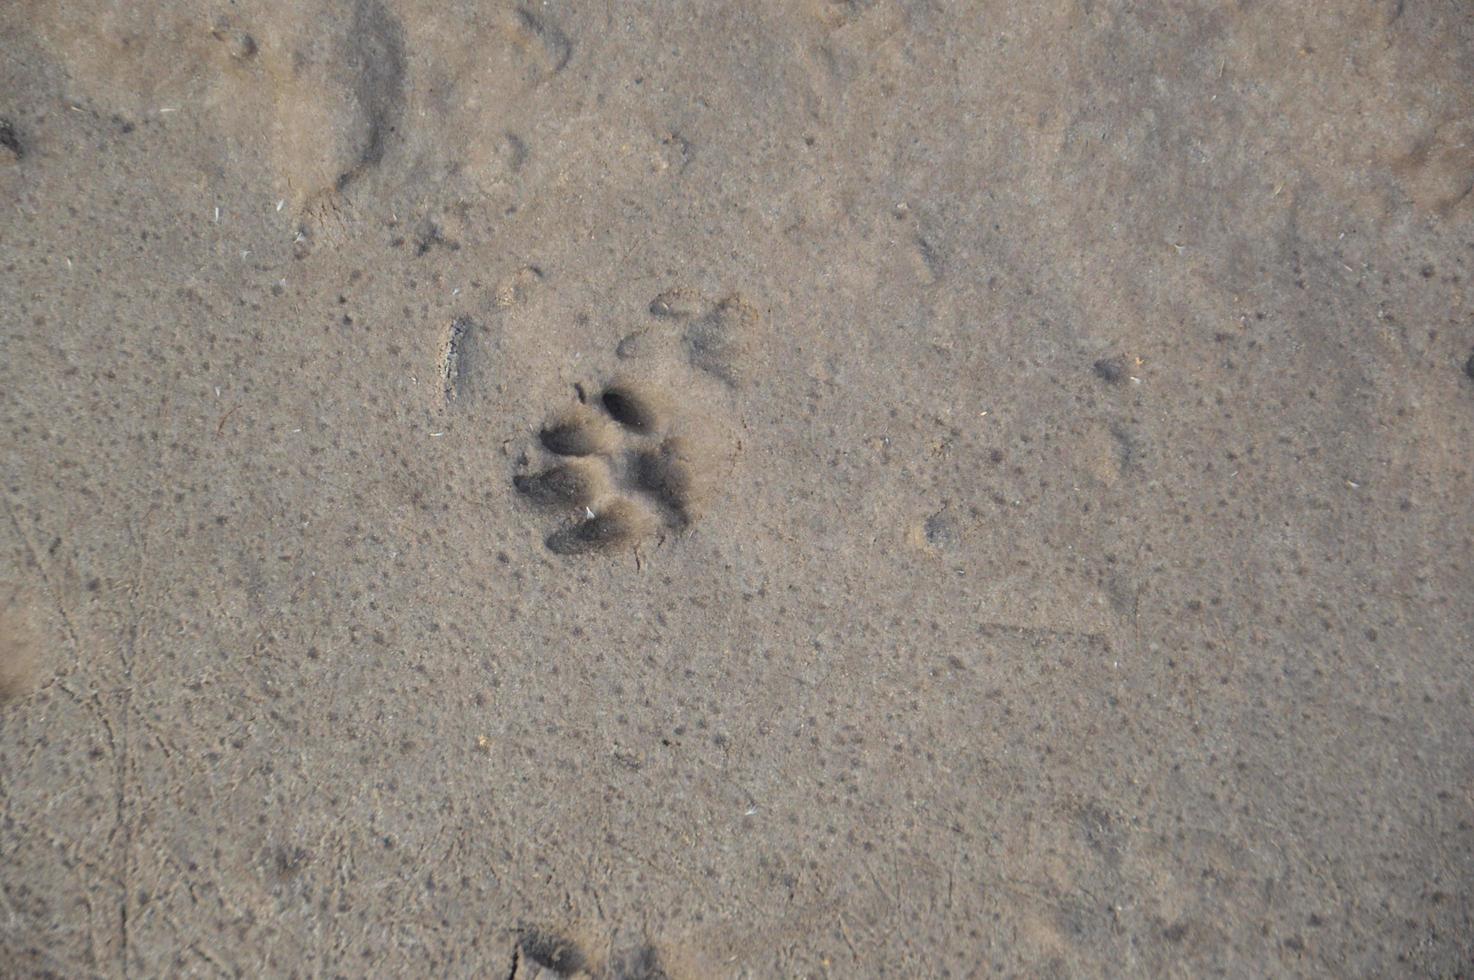 Animal footprints are imprinted on the ground photo